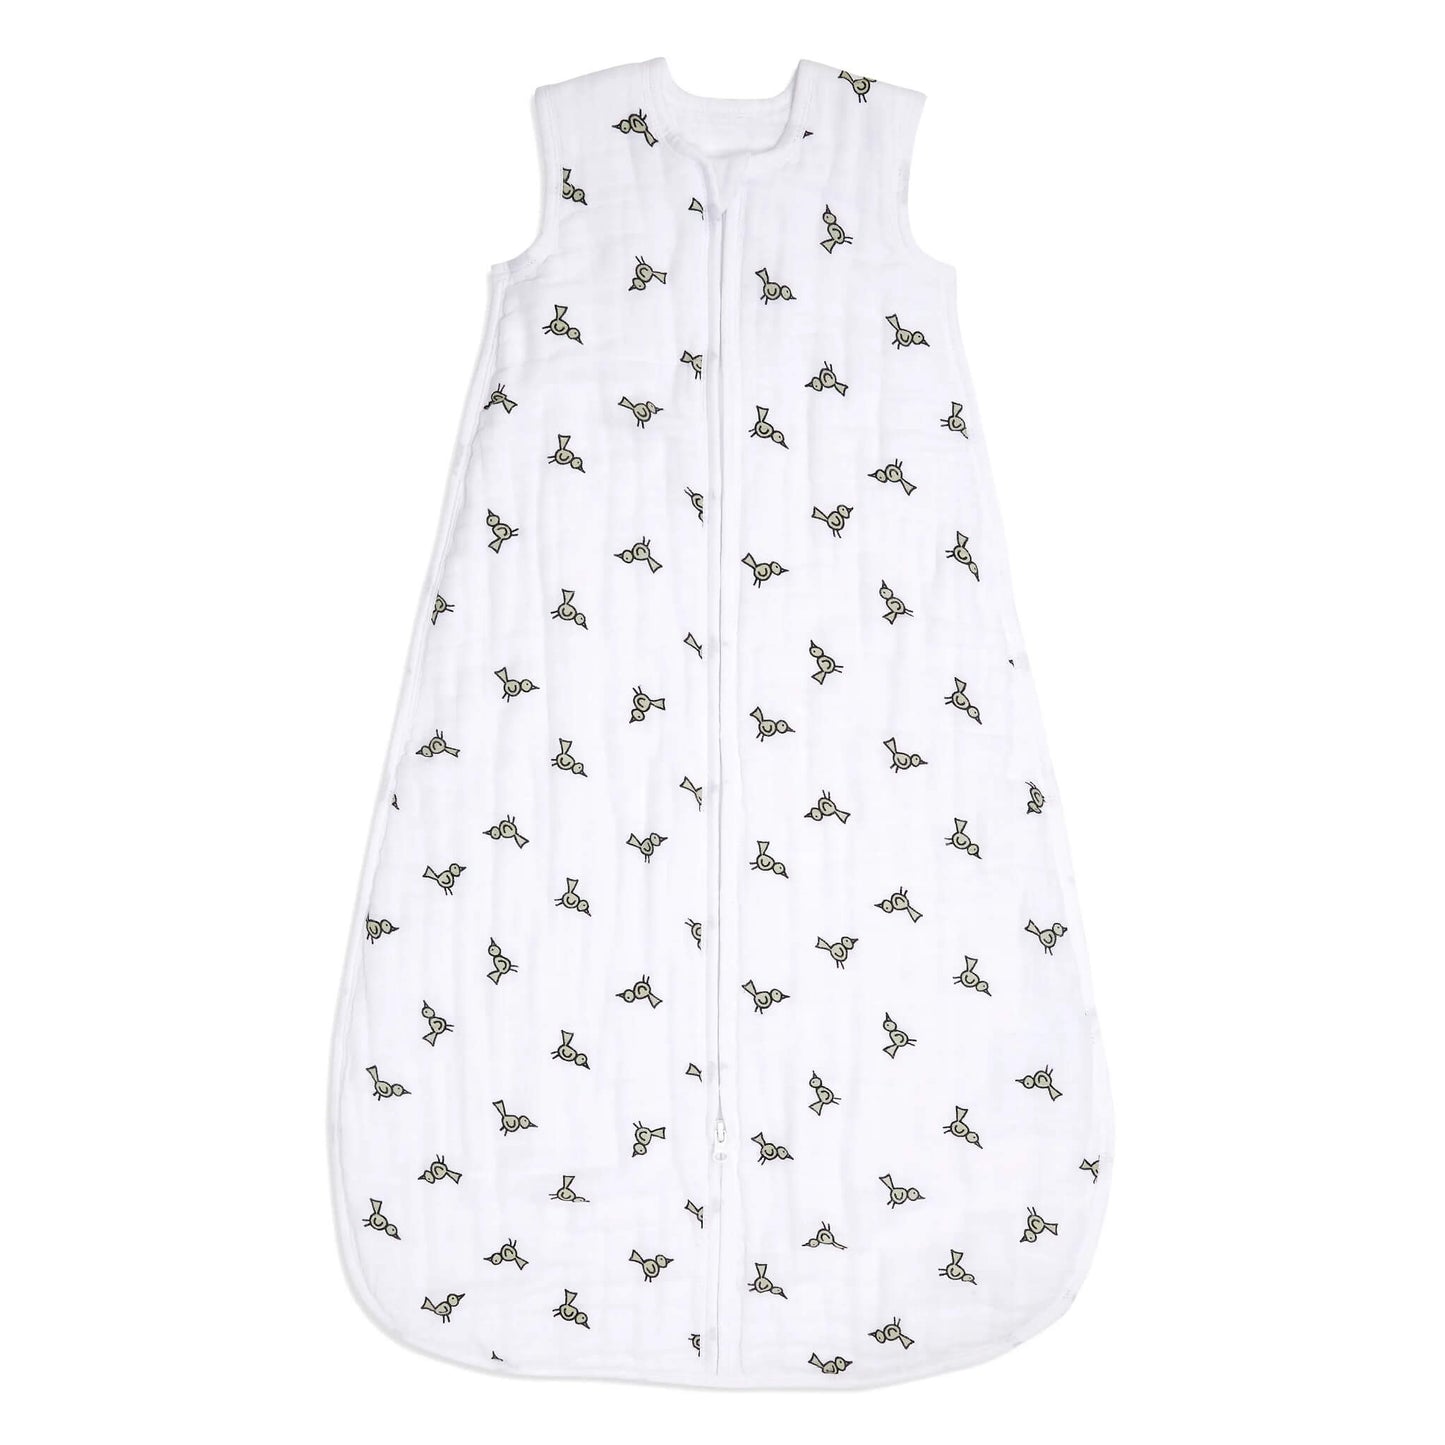 aden + anais mid season 1.5 tog baby sleeping Bag, designed to be worn over pyjamas to replace loose blankets in the cot for a safer sleep.